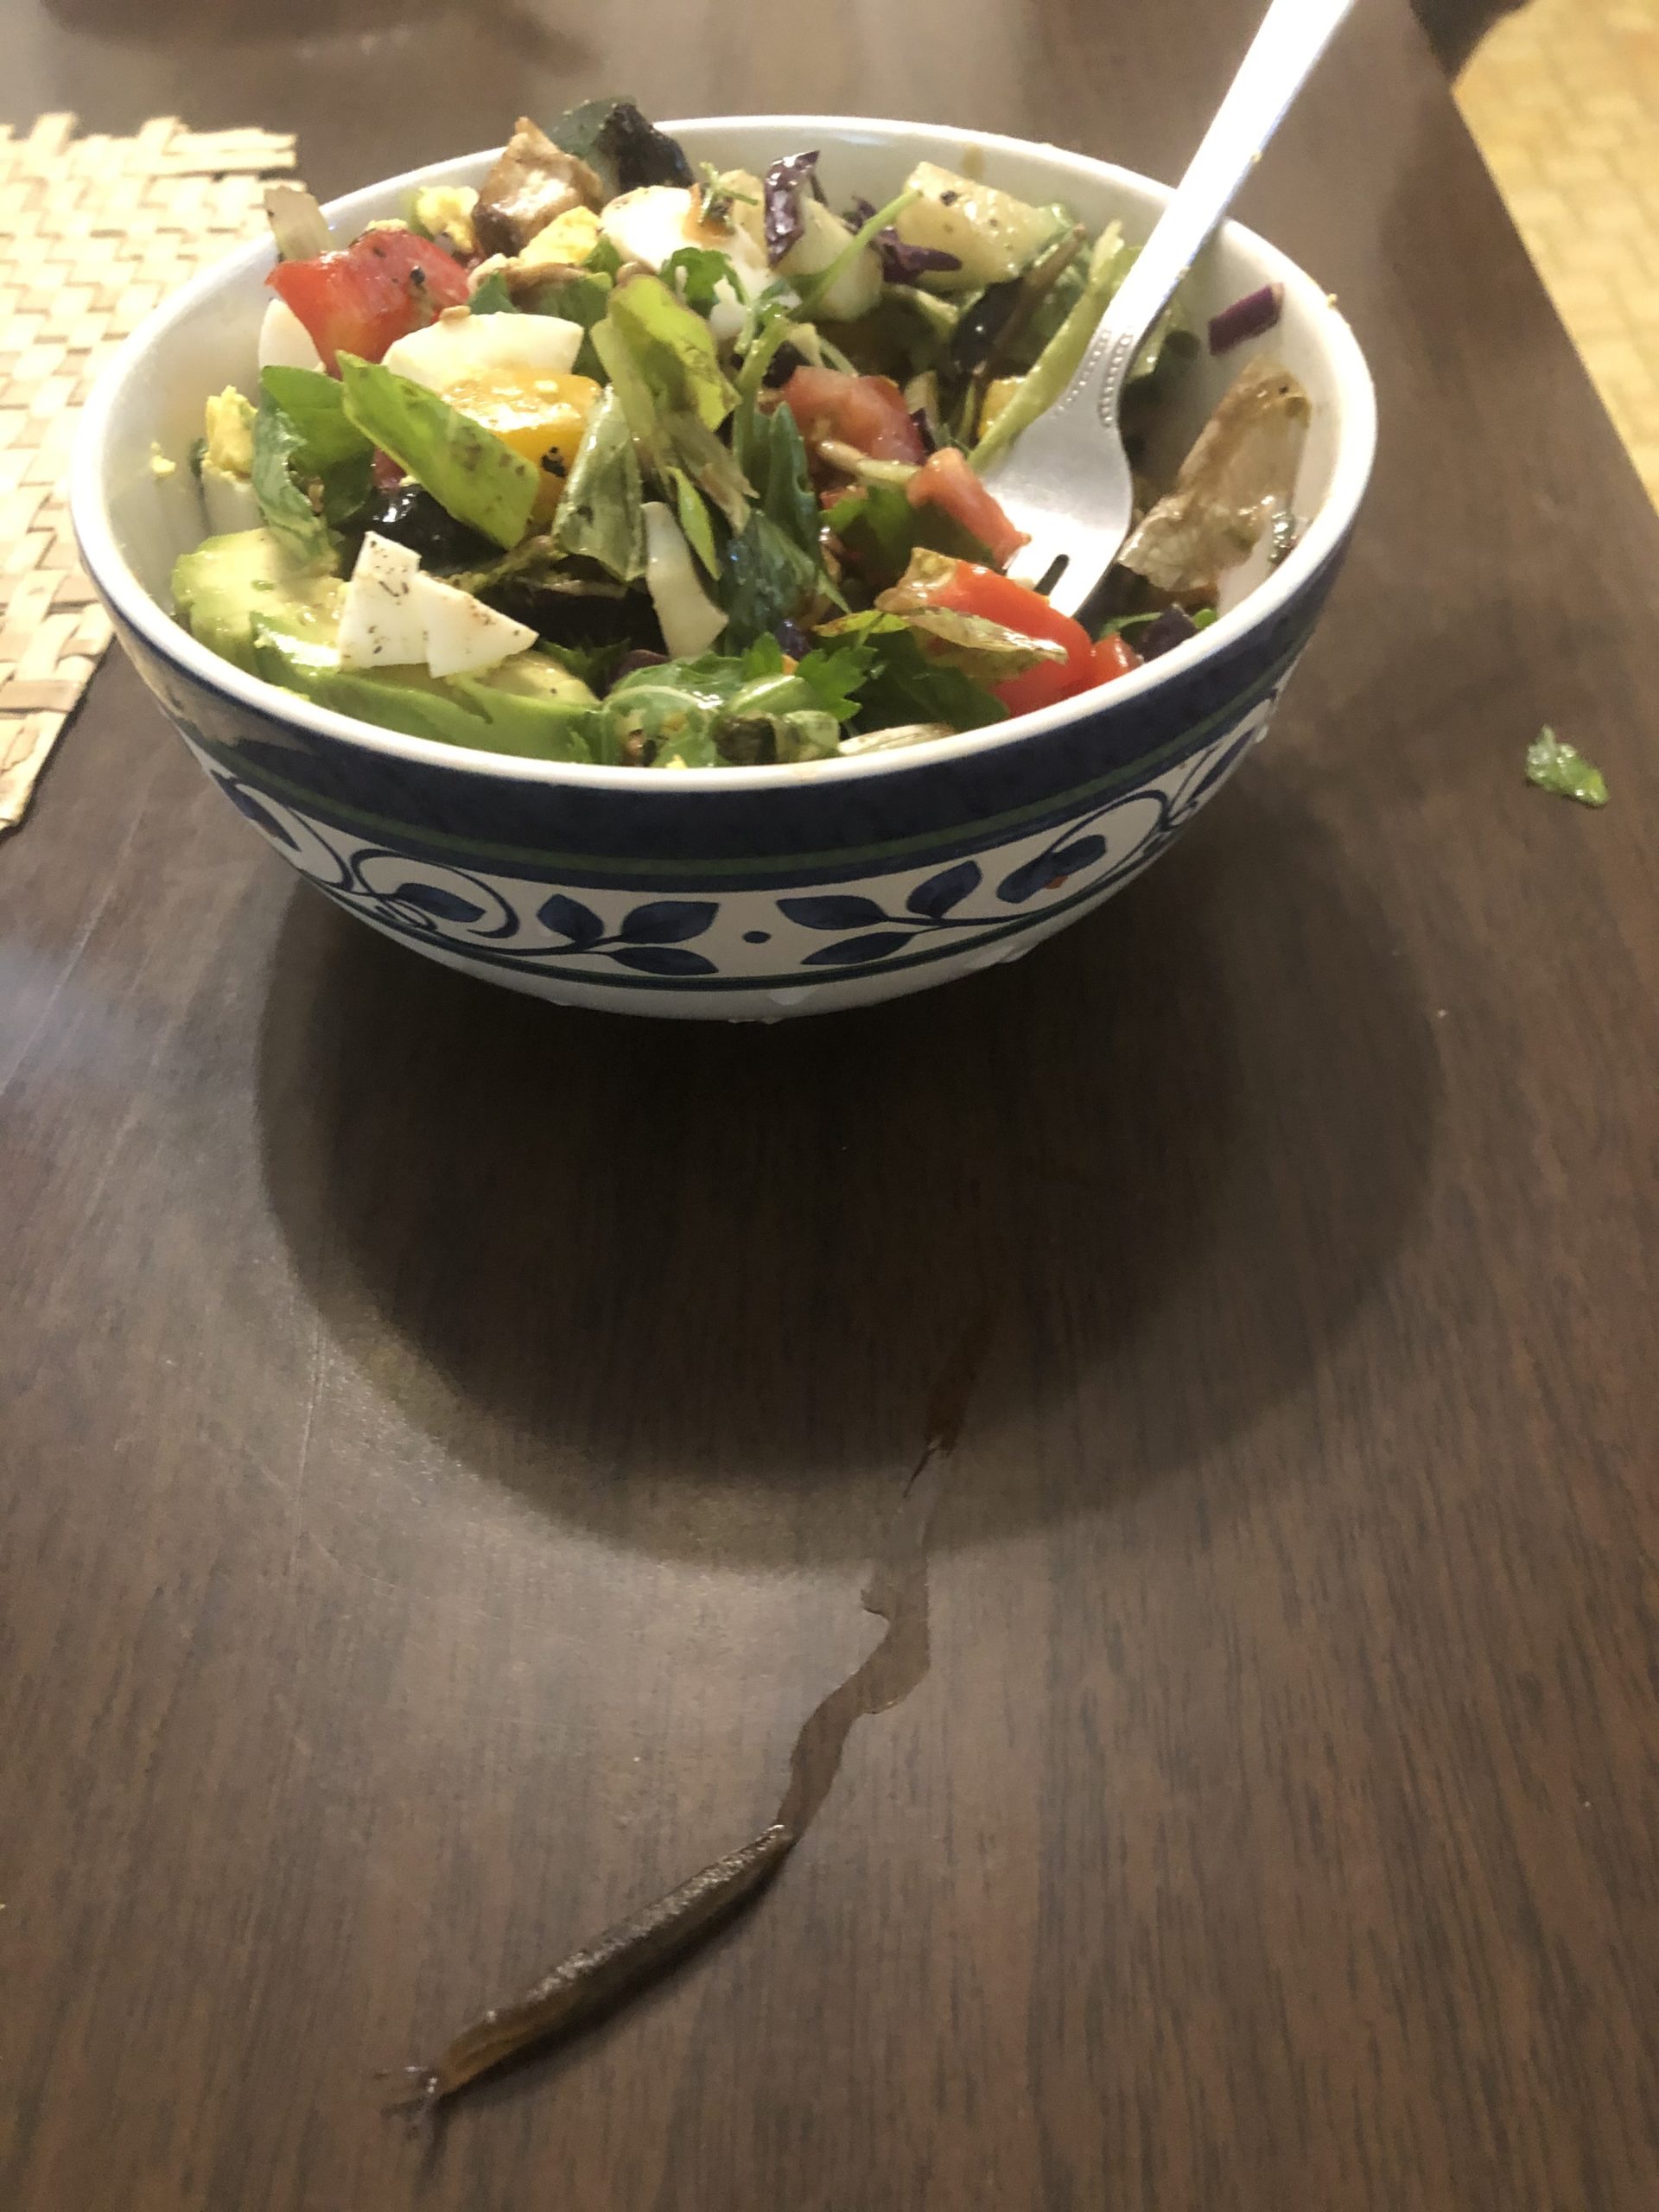 A slimy marauder slithers across the kitchen table (bottom left) after being discovered in a salad filled with greens (and slimy) from the garden. Nonetheless, the slug was 100 percent organic.